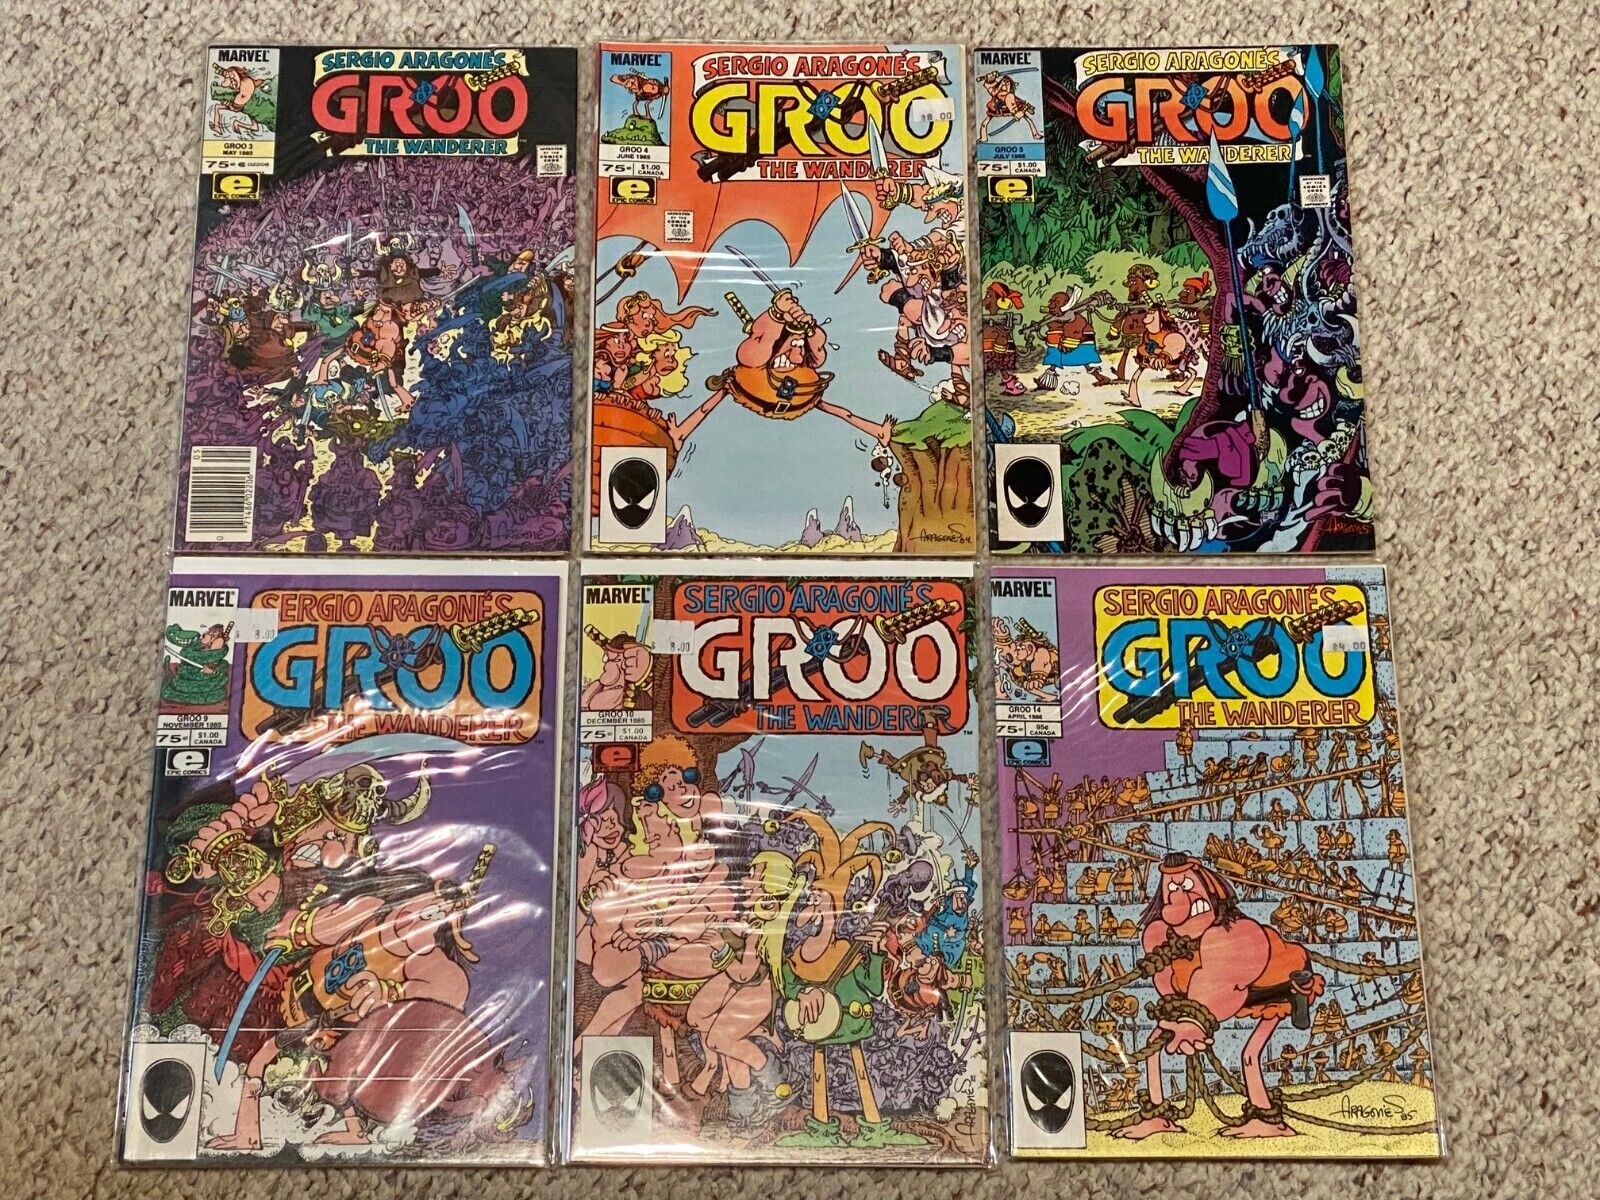 HUGE LOT OF 83 GROO THE WANDERER COMIC BOOK ISSUES BY SERGIO ARAGONES